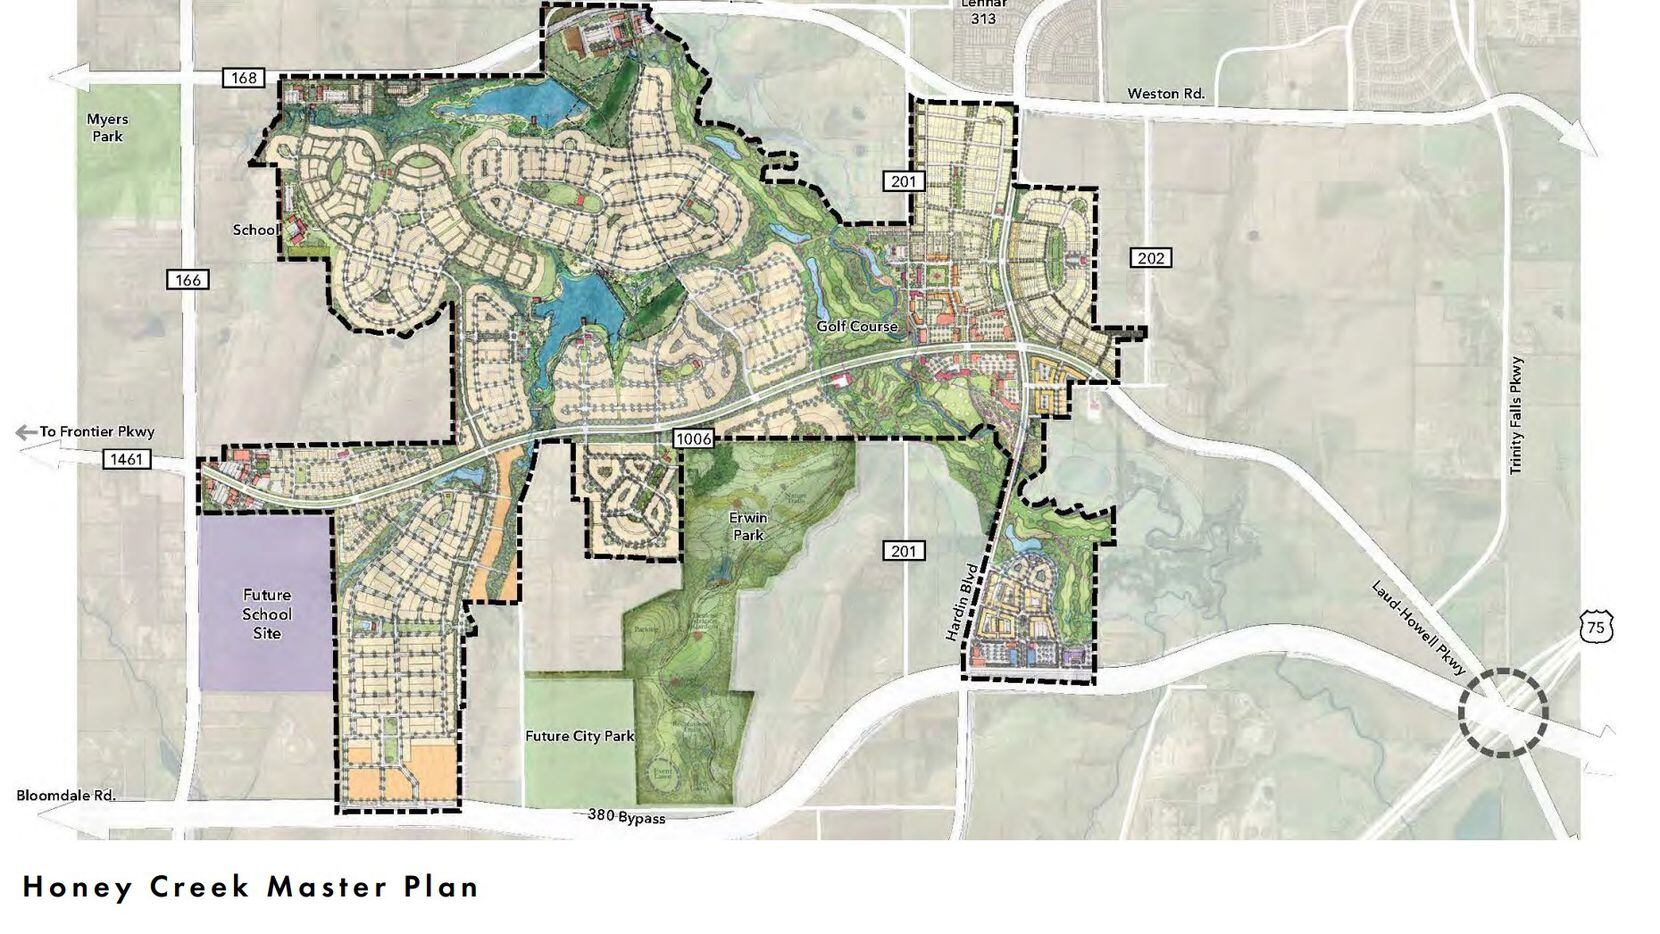 A conceptual plan for the Honey Creek development in northern McKinney submitted to the city...